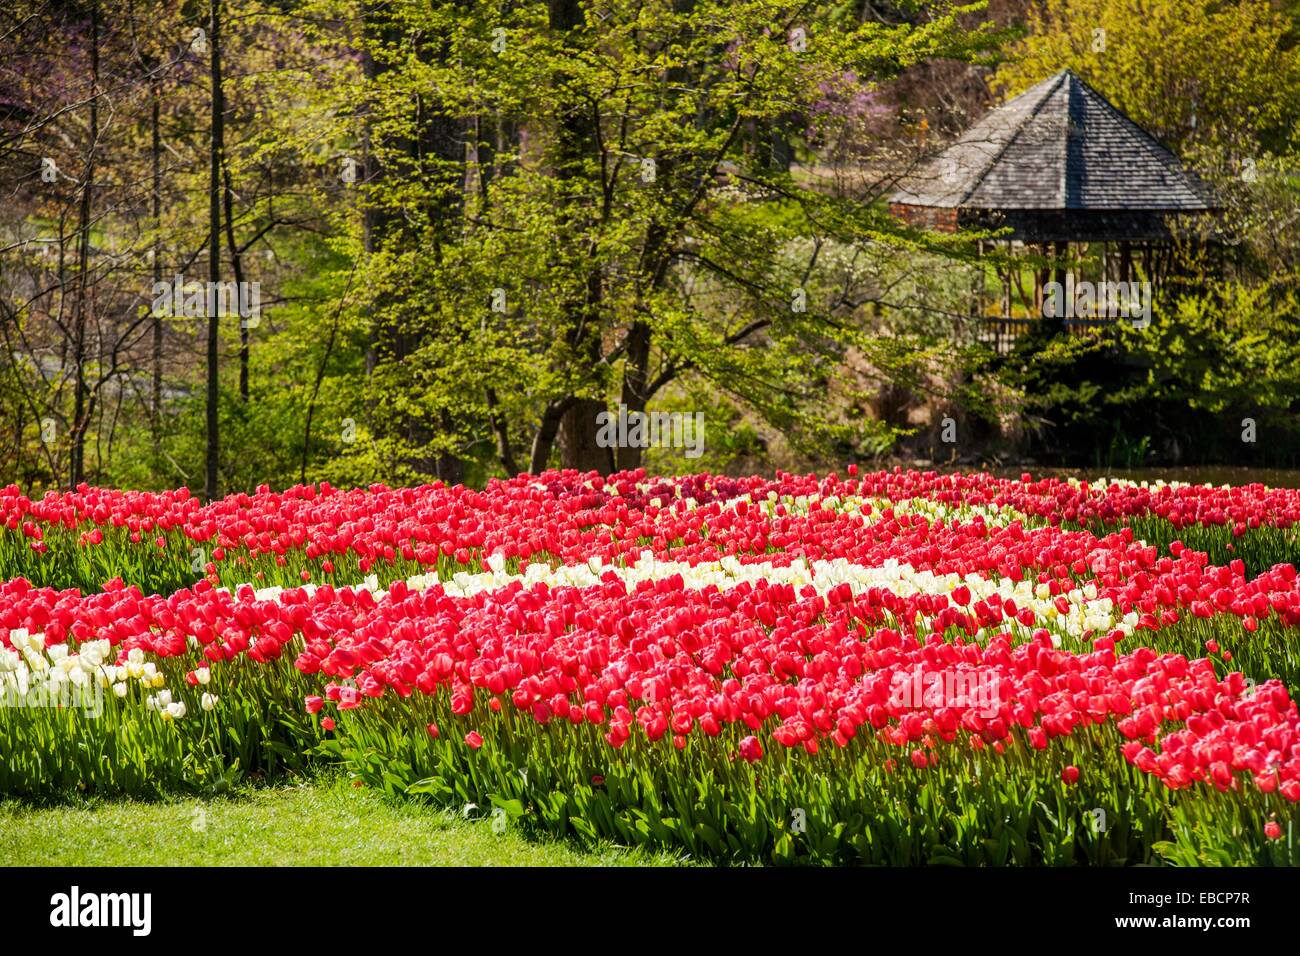 Spring Tulips In Bloom At Brookside Garden Stock Photo 75883579